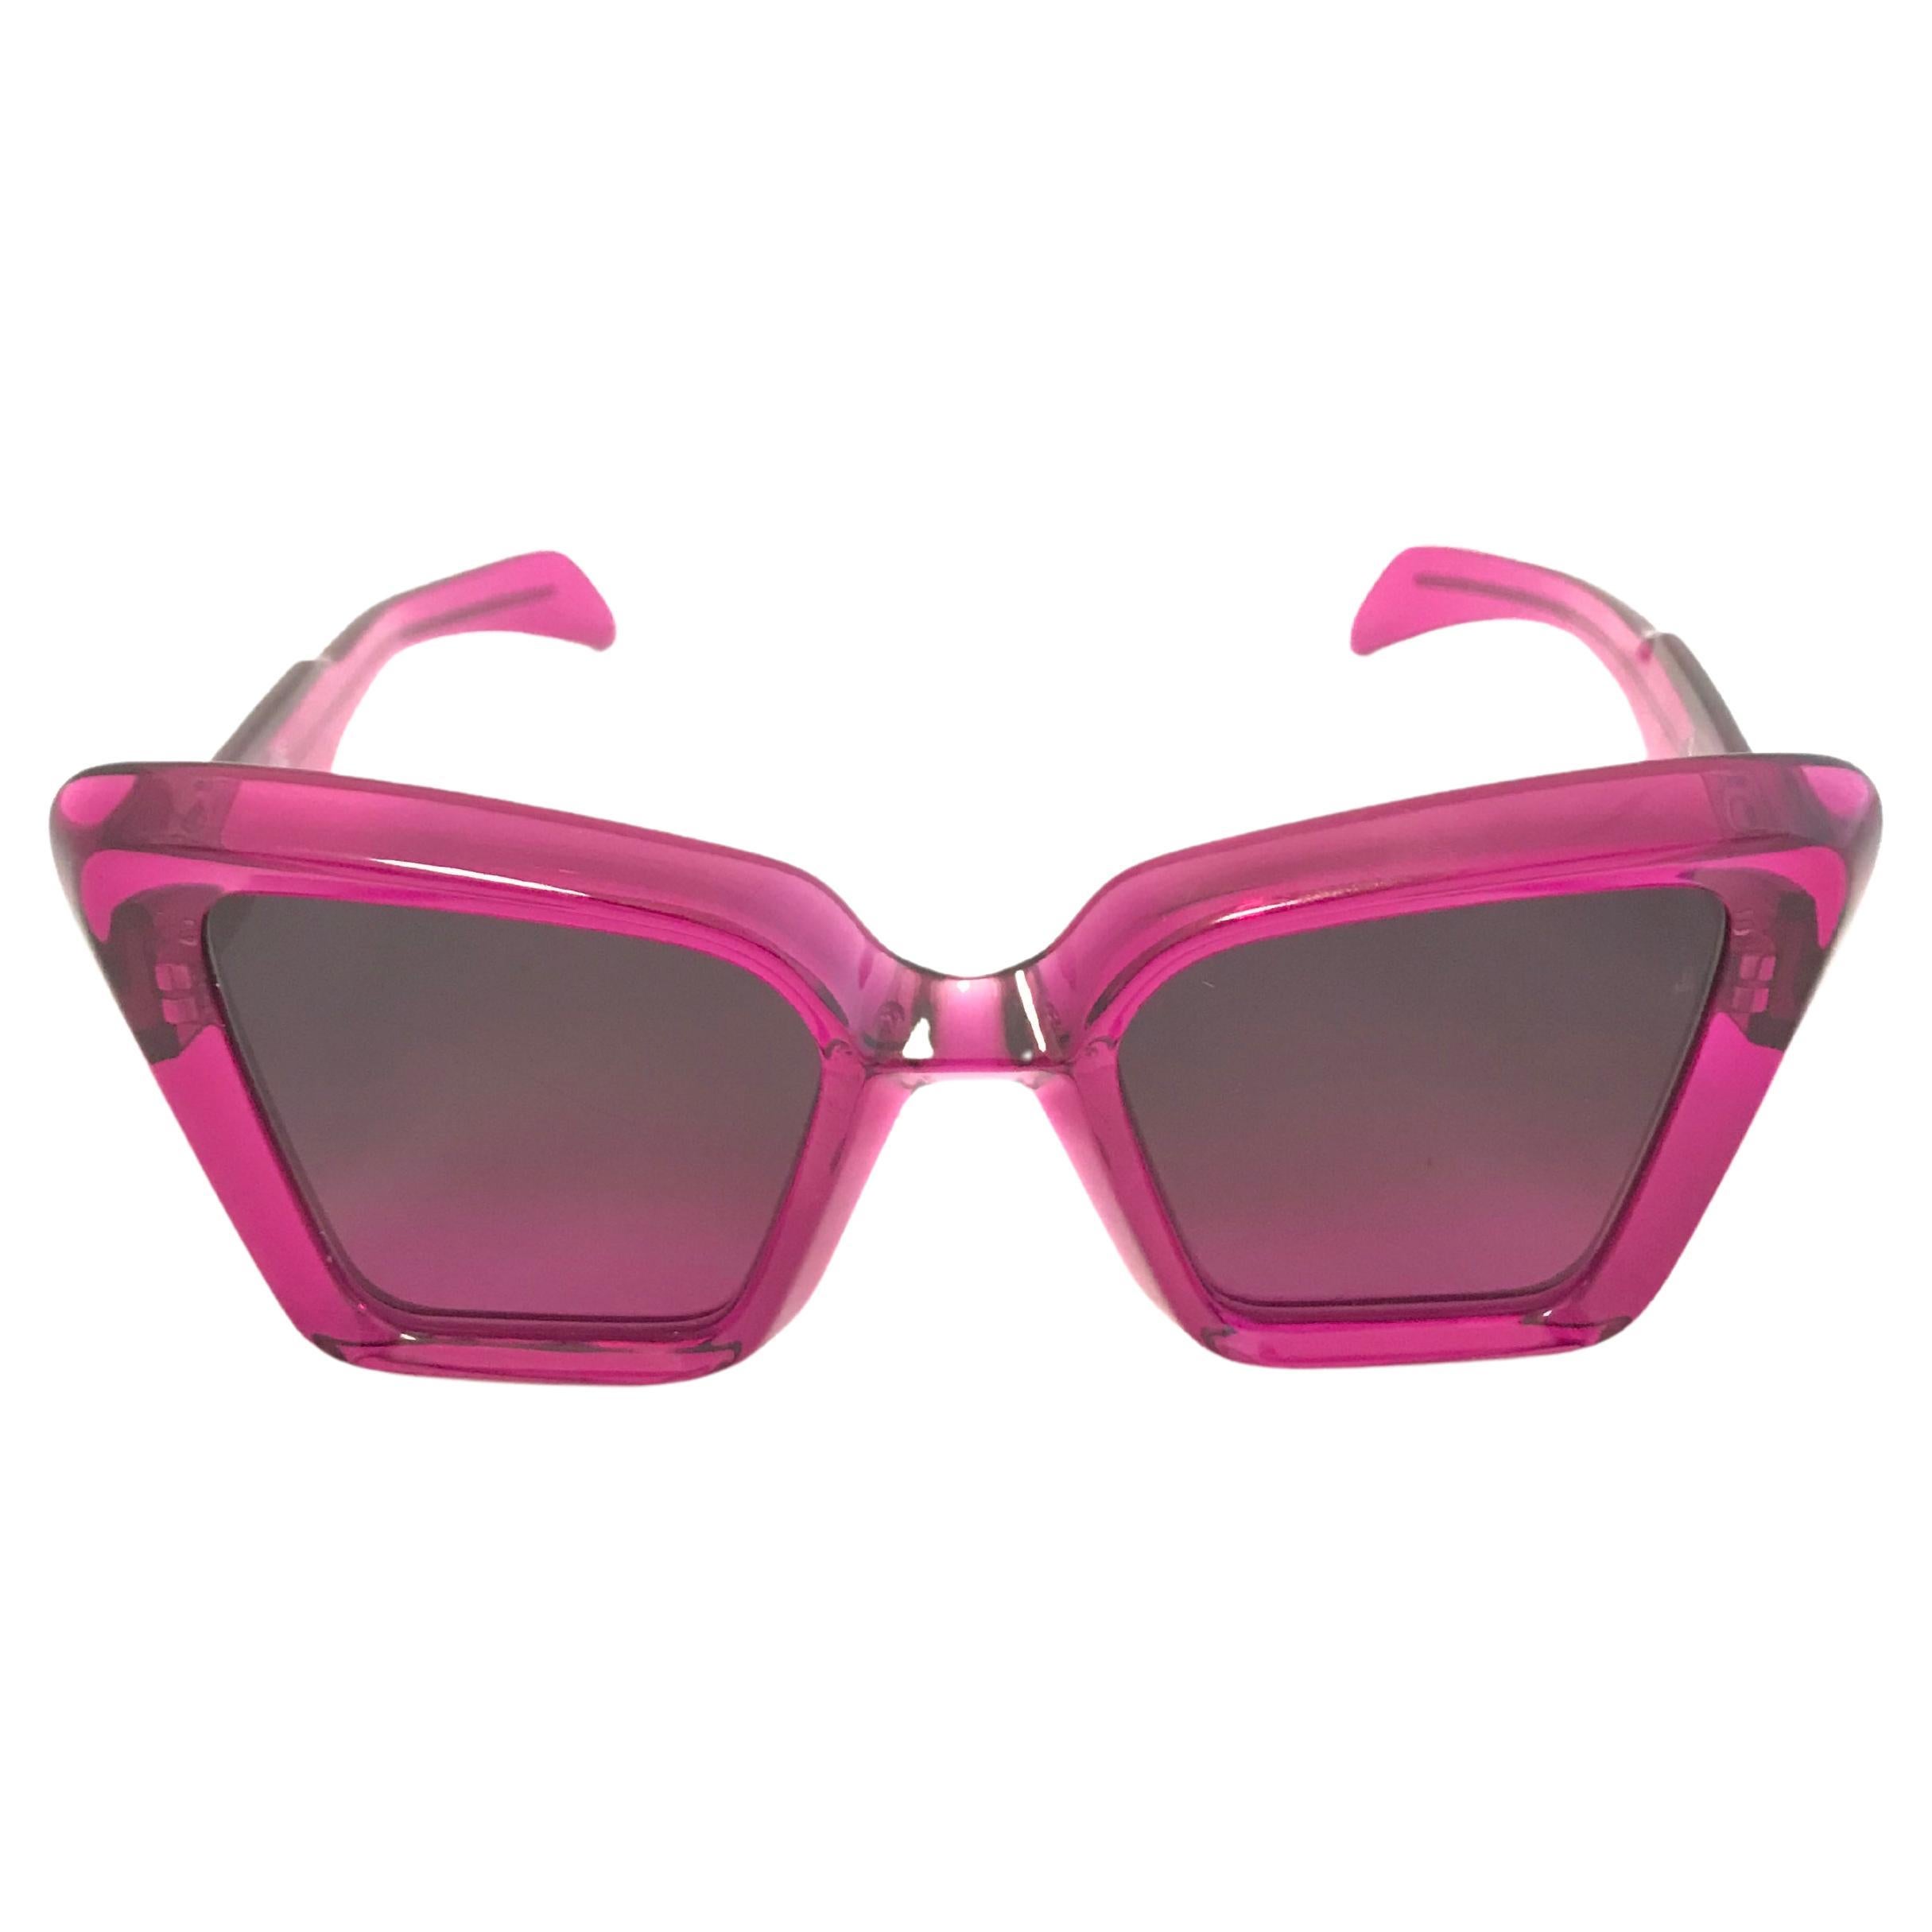 Glossy pink acetate Jacques Marie Mage 'Sly' sunglasses from the eponymous brand. Oversized, chunky, cat eye shape with a subtle black and pink ombre tint on the lens. Legs are acetate with slim silver strips running along, encased in the acetate,